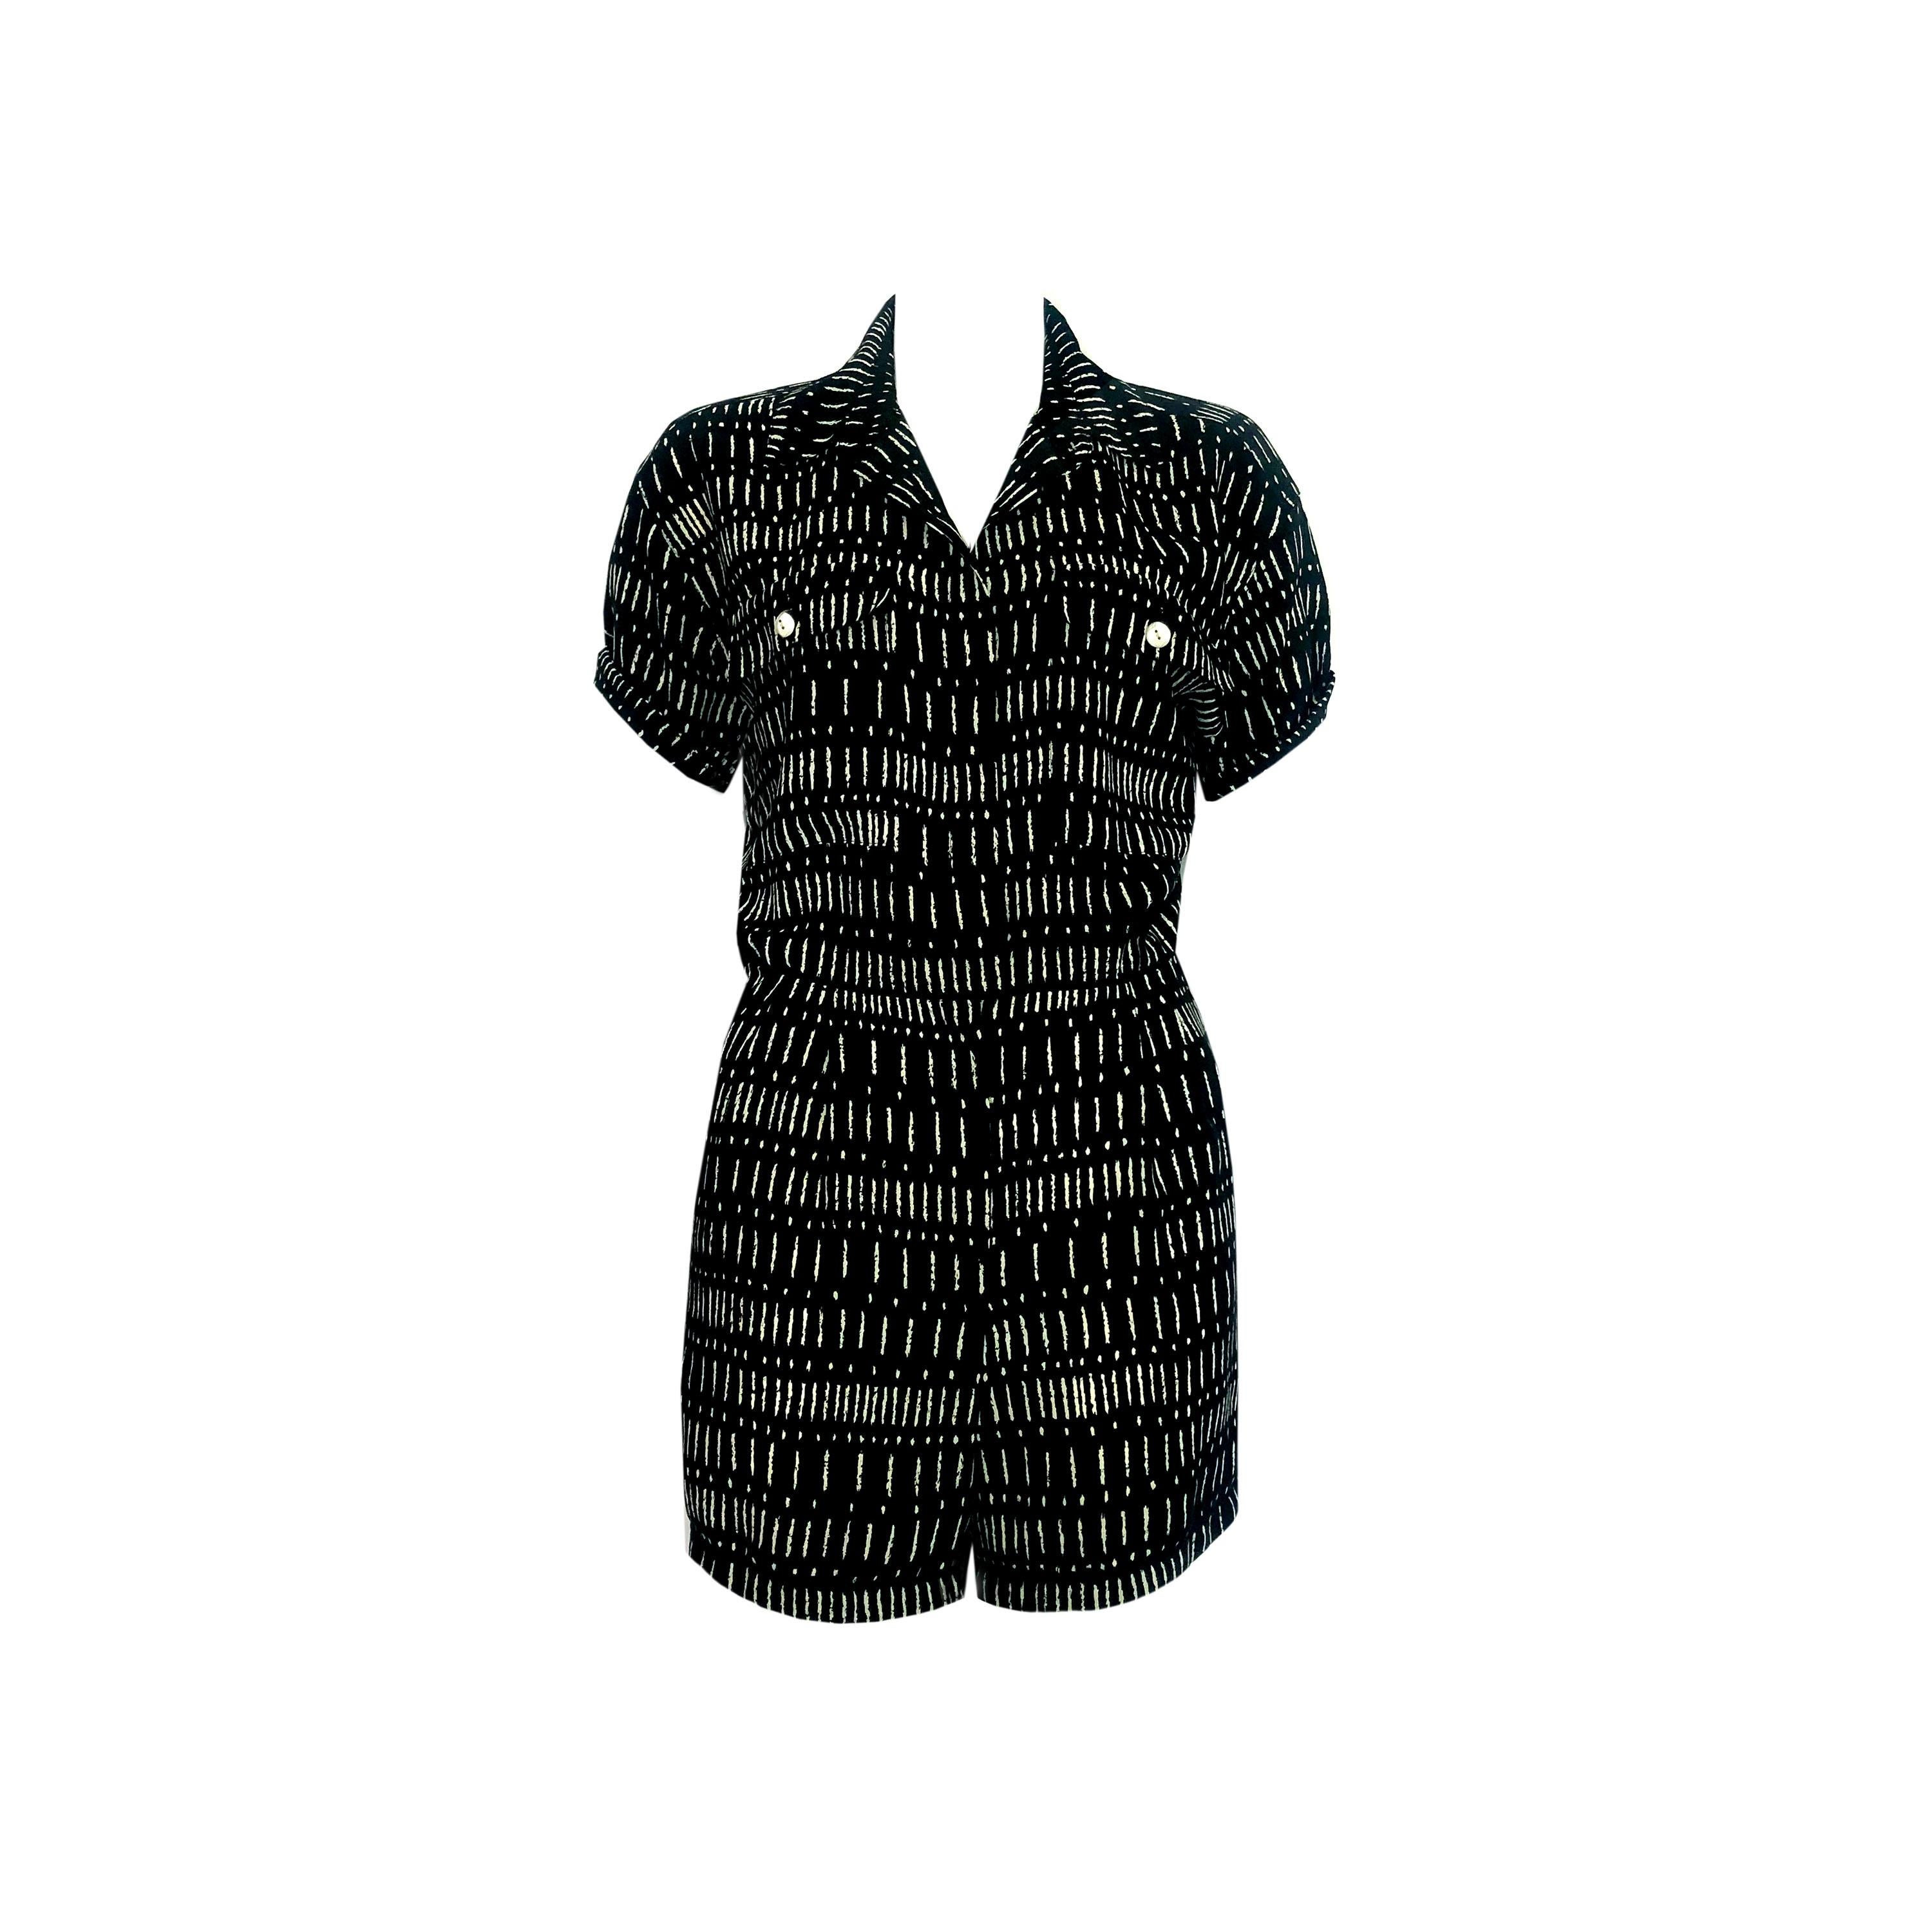 1980s Vintage Playsuit - Black & White Abstract Print - Pockets Details For Sale 1